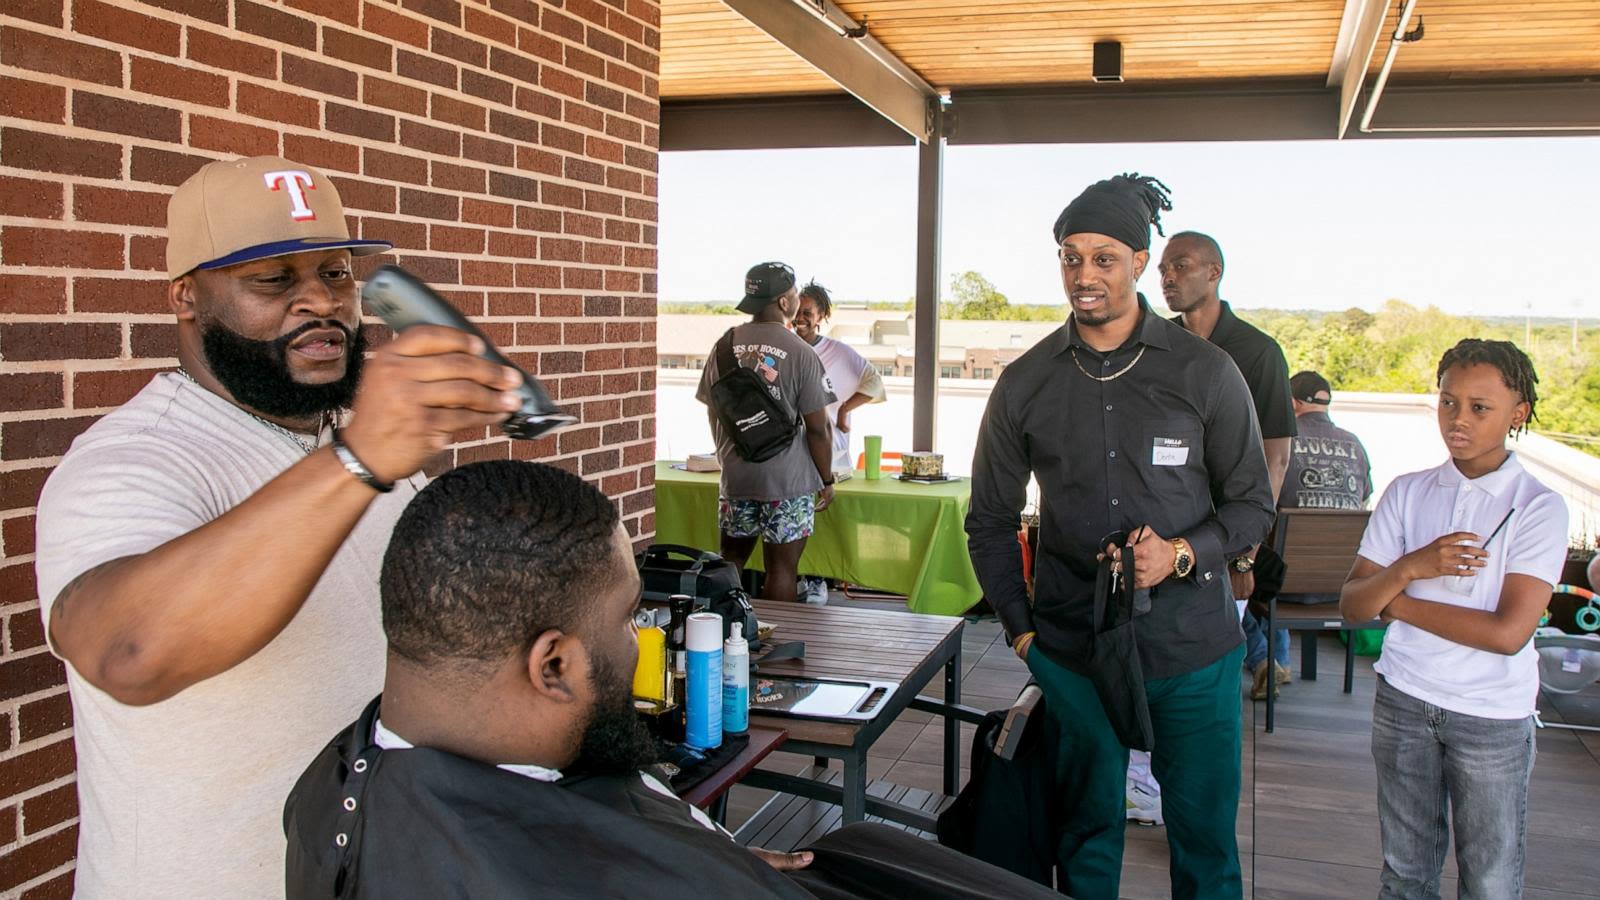 Barbershop therapy: providing a safe space for men of color to talk about their problems